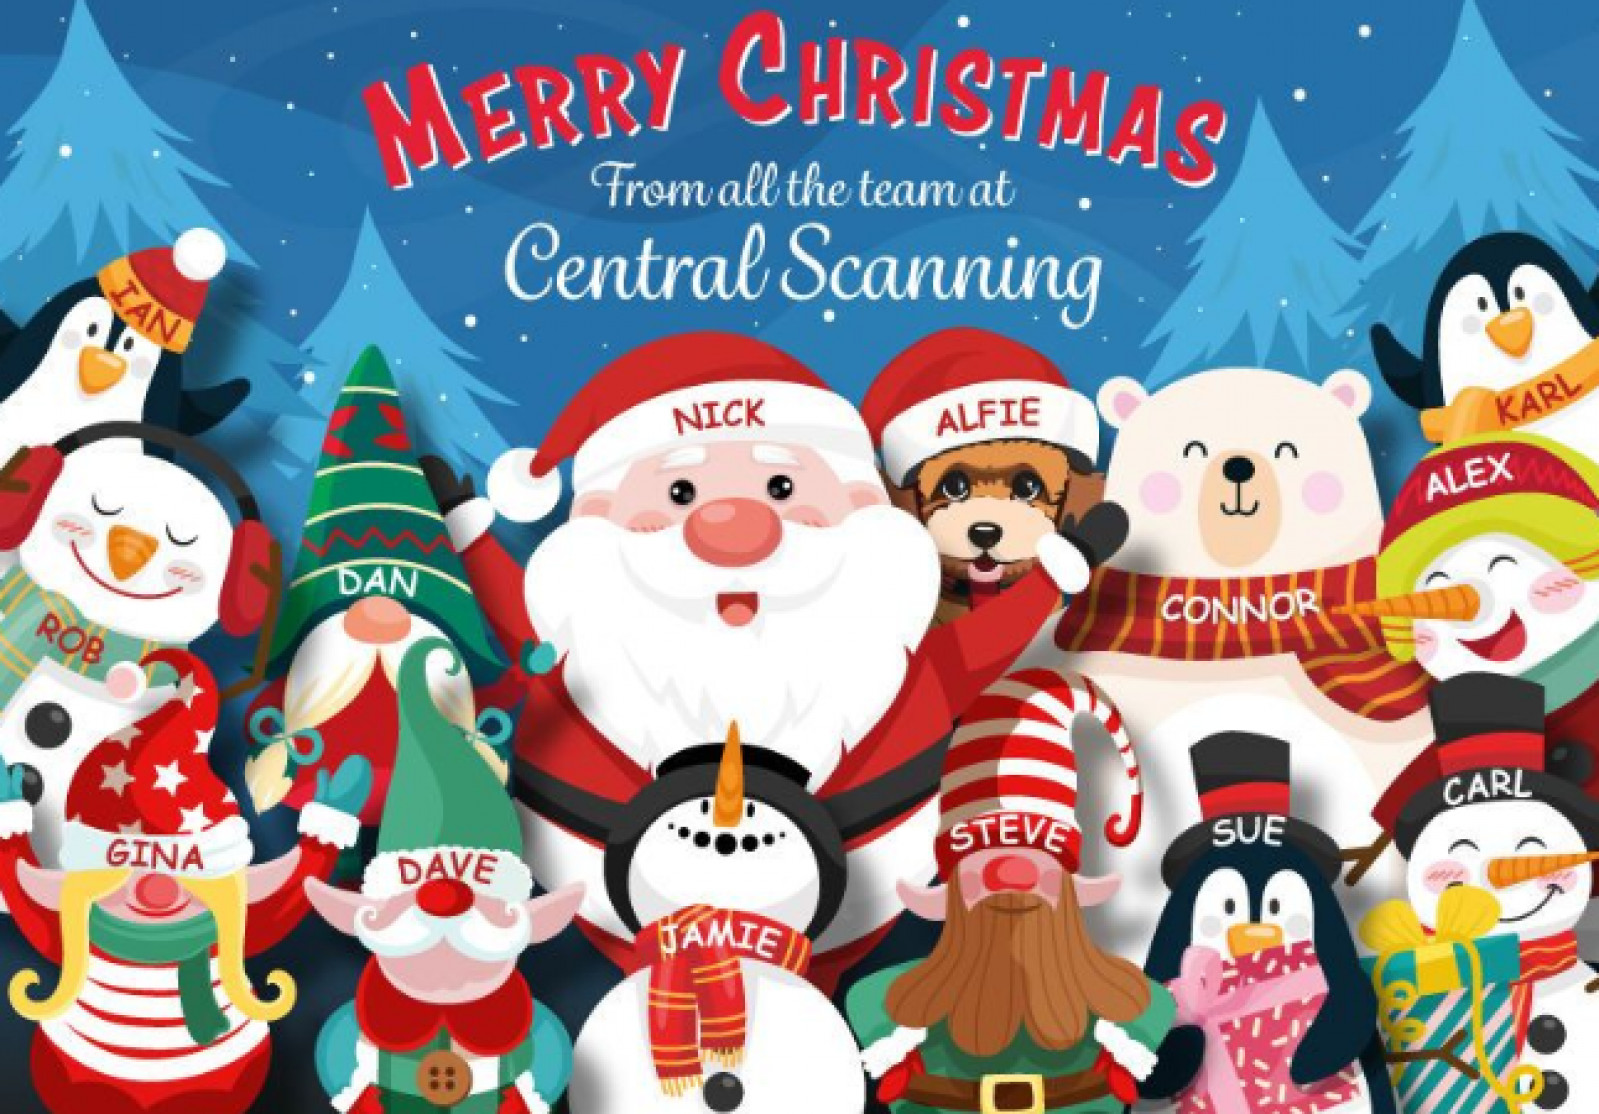 Festive best wishes from Central Scanning.